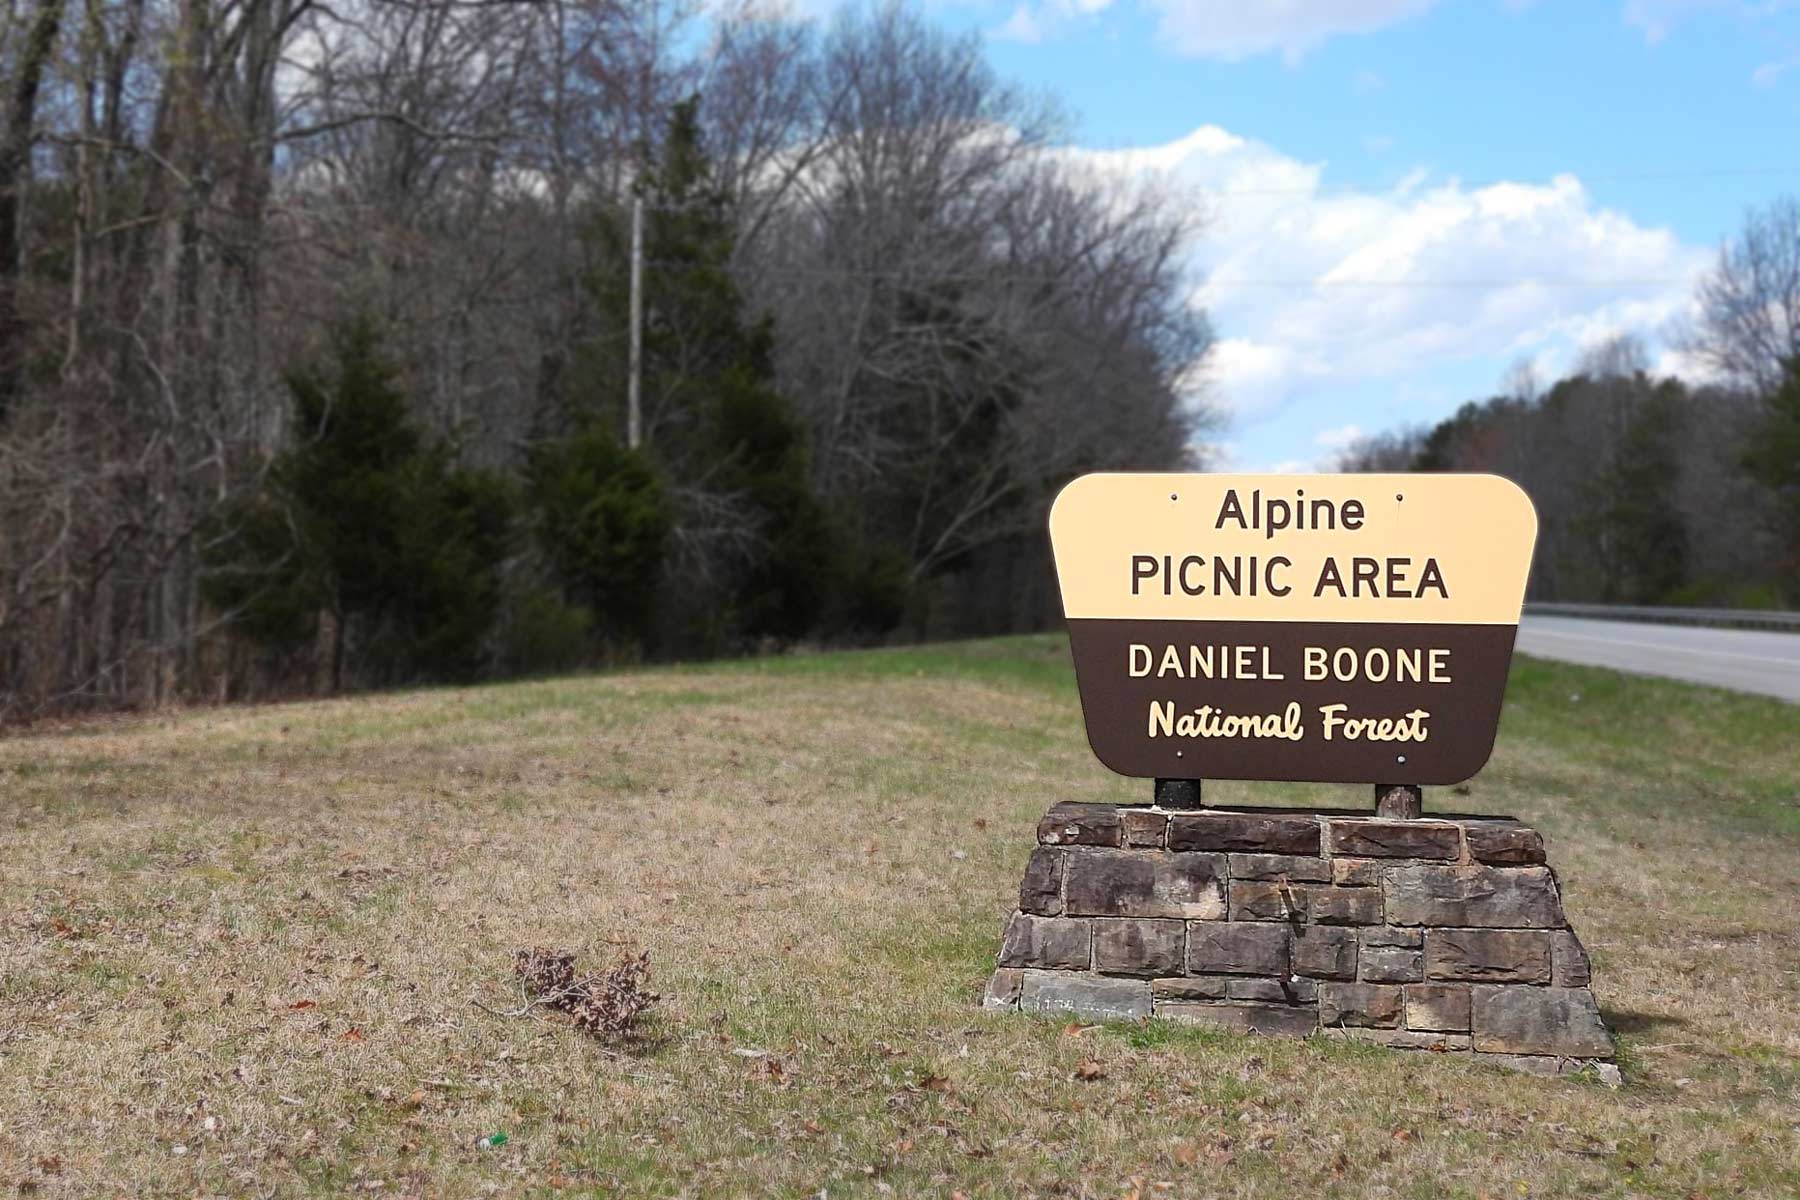 Field and woods with sign that ready Alpine Picnic Area Daniel Boone National Forest.